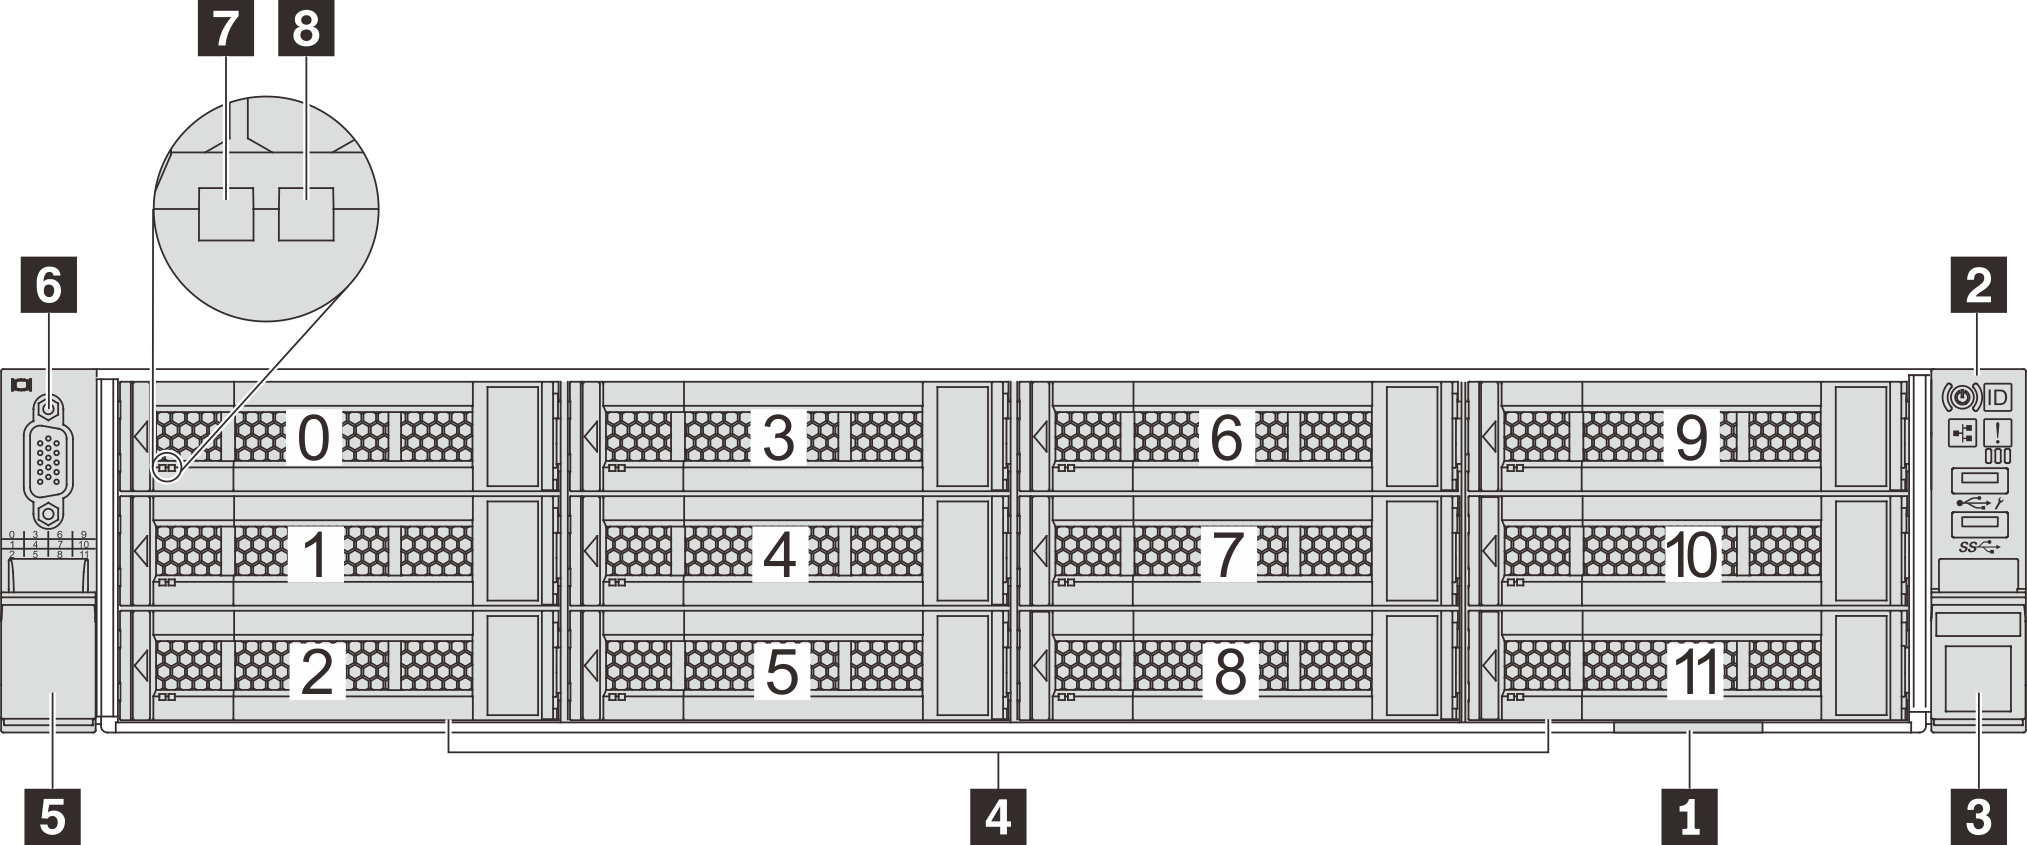 Front view of server models with twelve 3.5-inch drive bays (0–11)